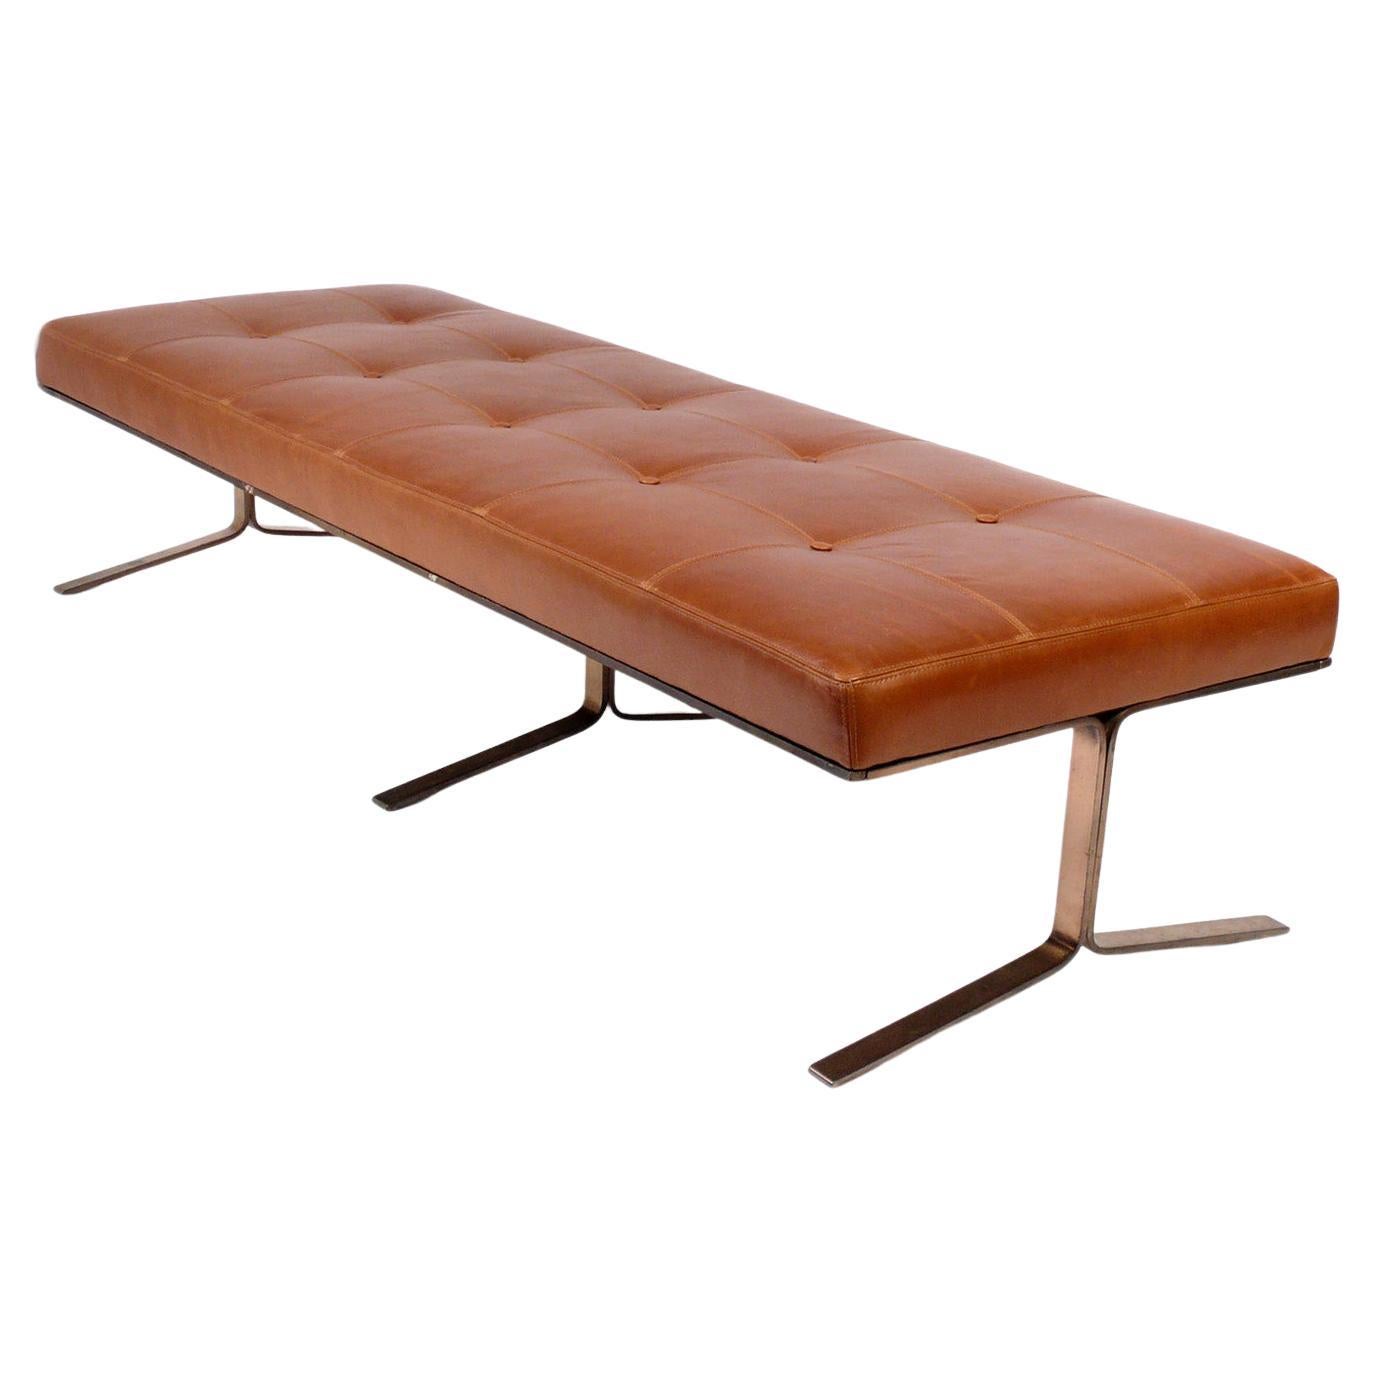 Bronze and Leather Daybed or Bench by Nicos Zographos